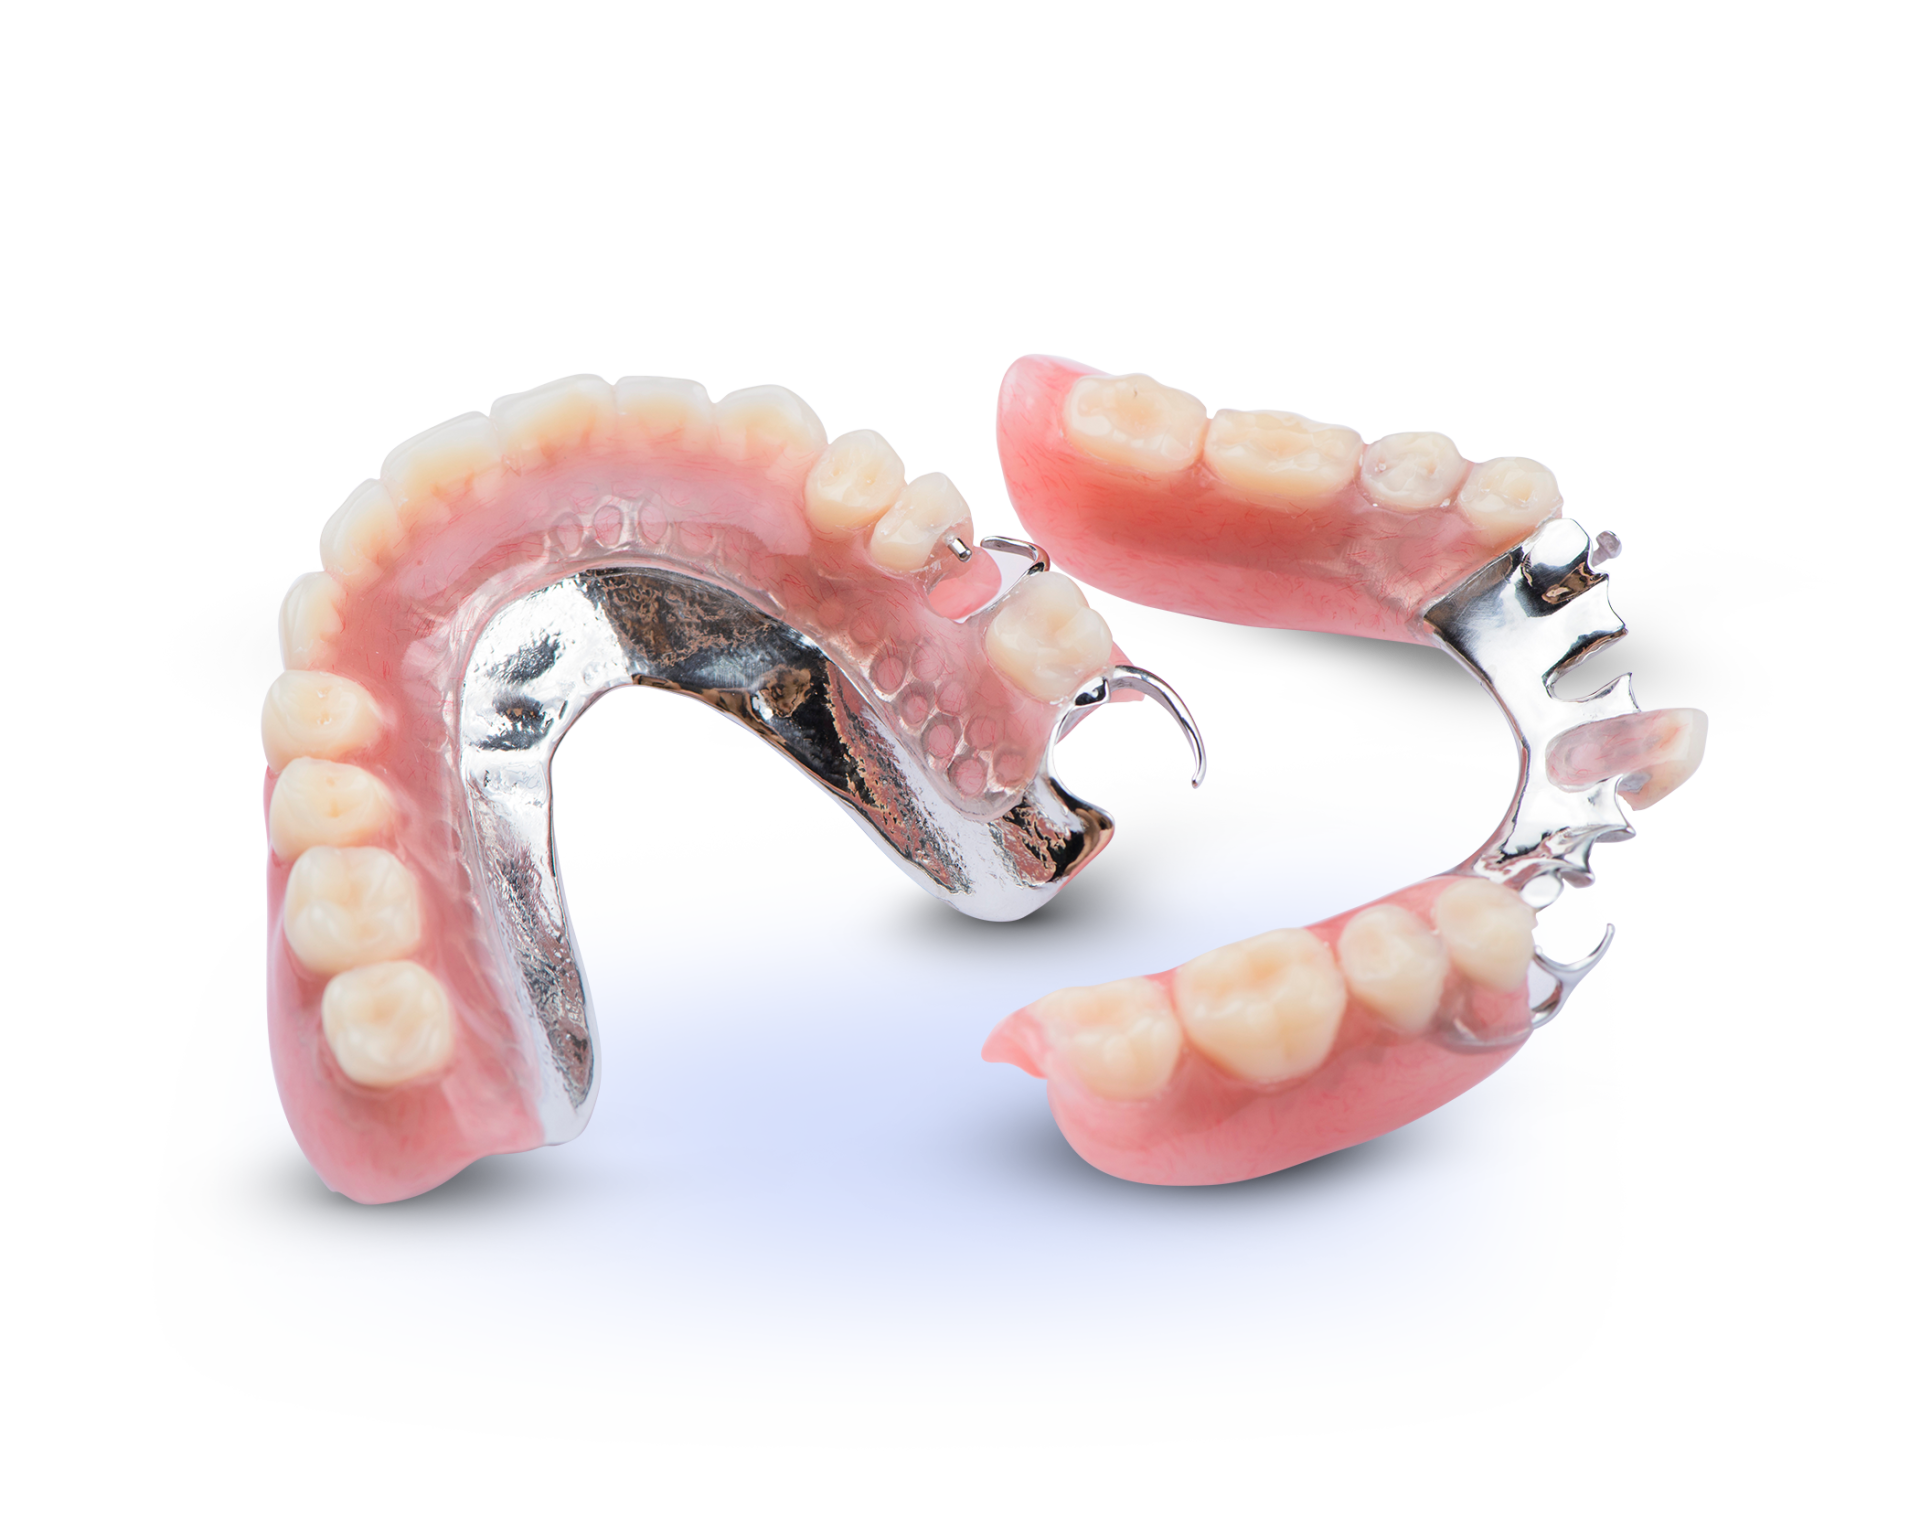 A close up of a pair of dentures on a white background